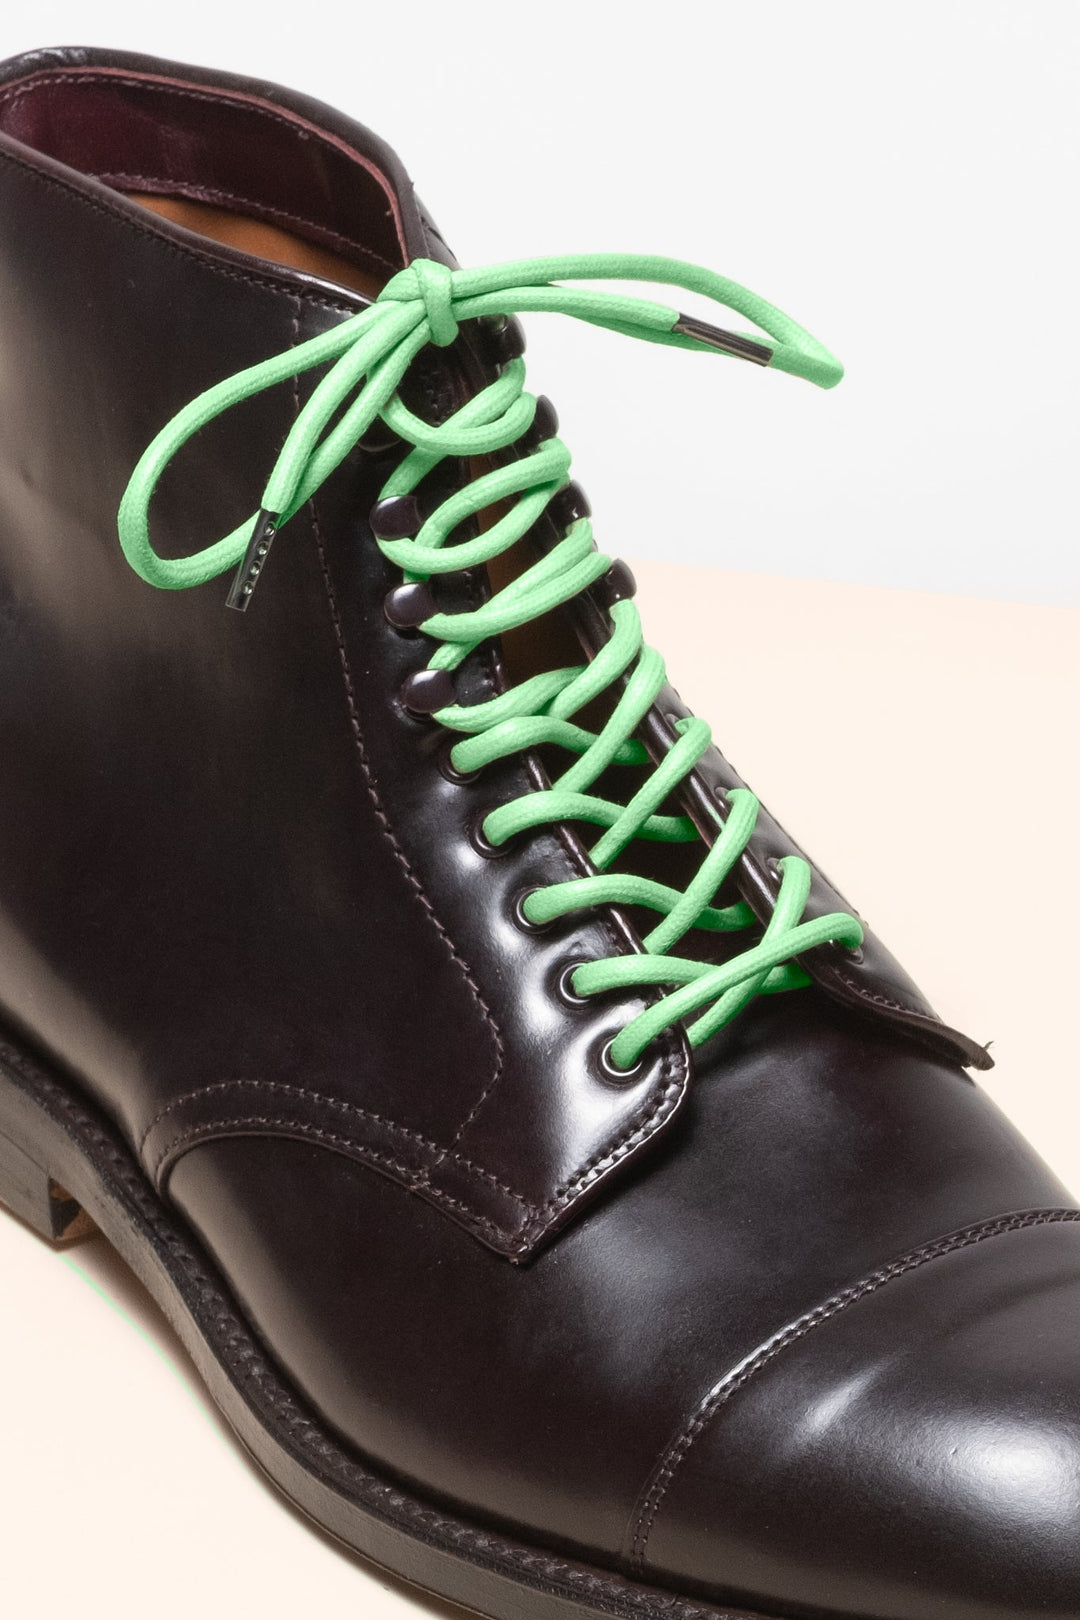 Grass Green - 4mm round waxed shoelaces for boots and shoes made from 100% organic cotton - Senkels